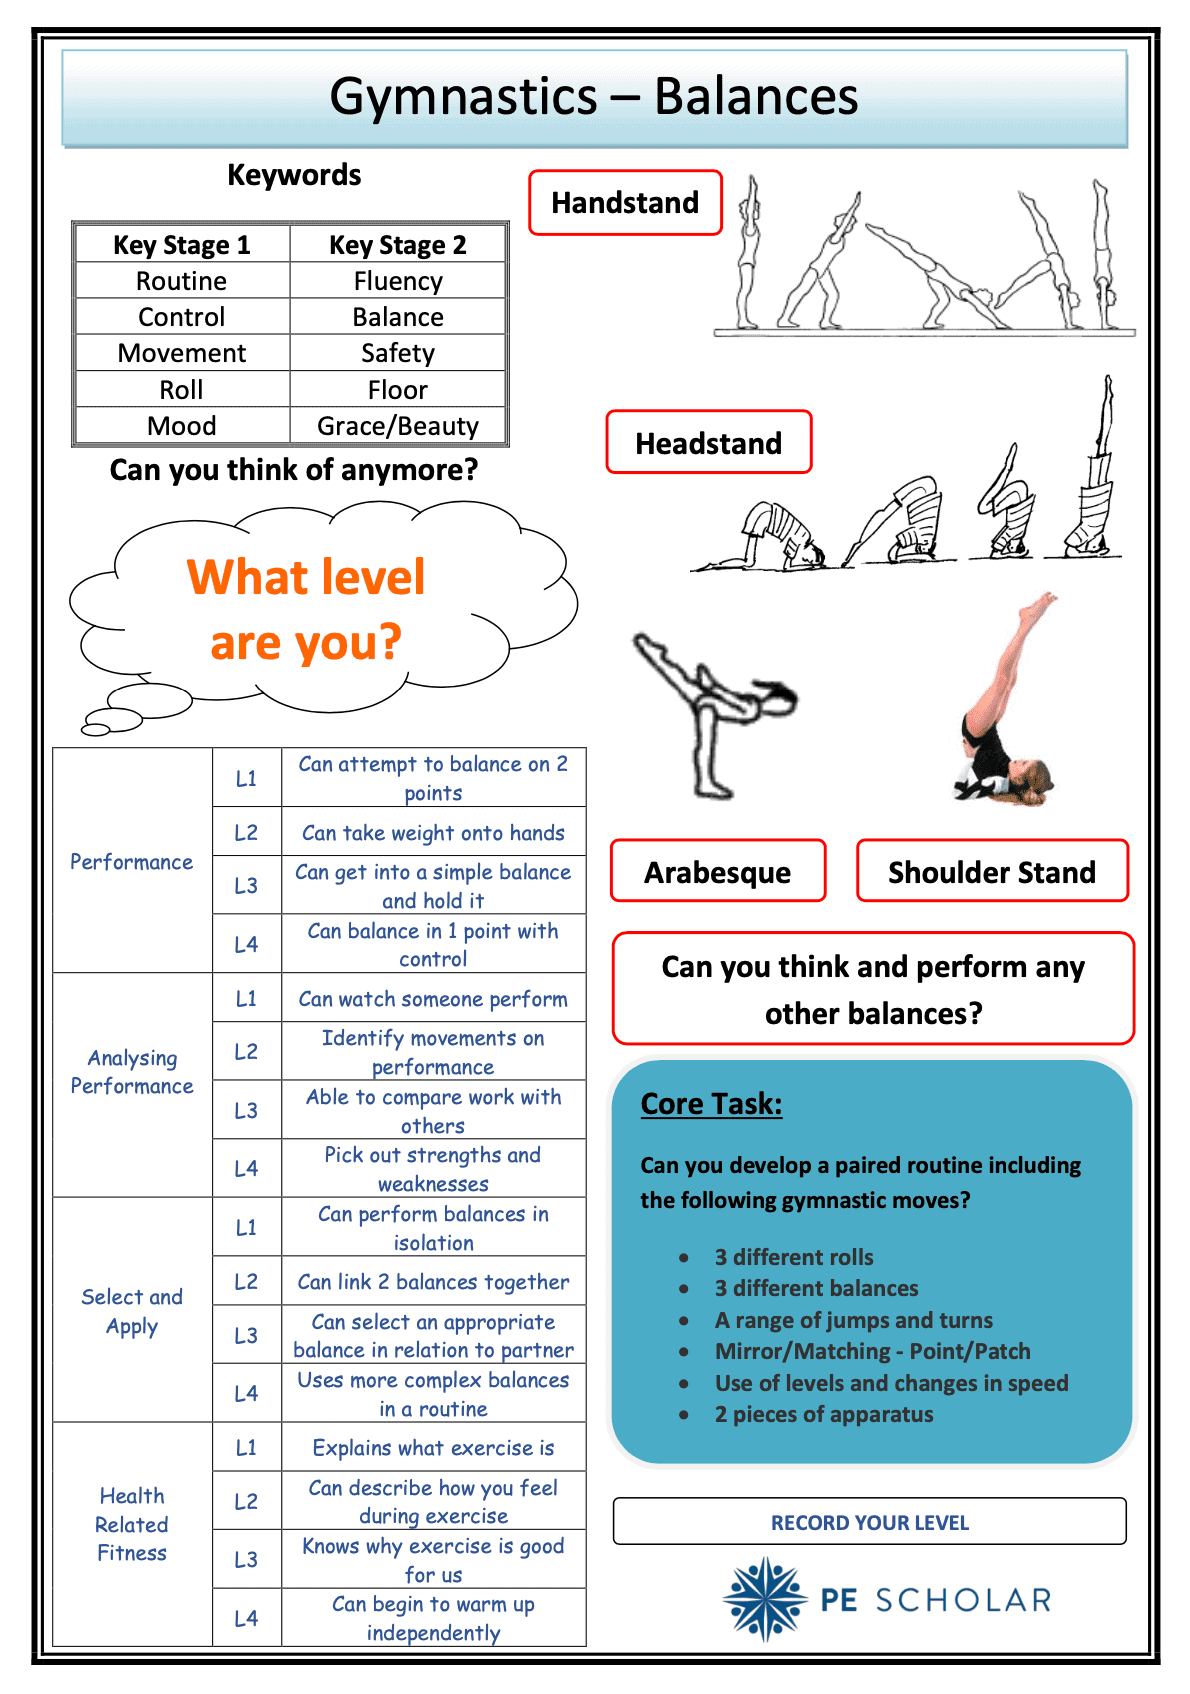 Gymnastic Balances Core Task and Assessment Card